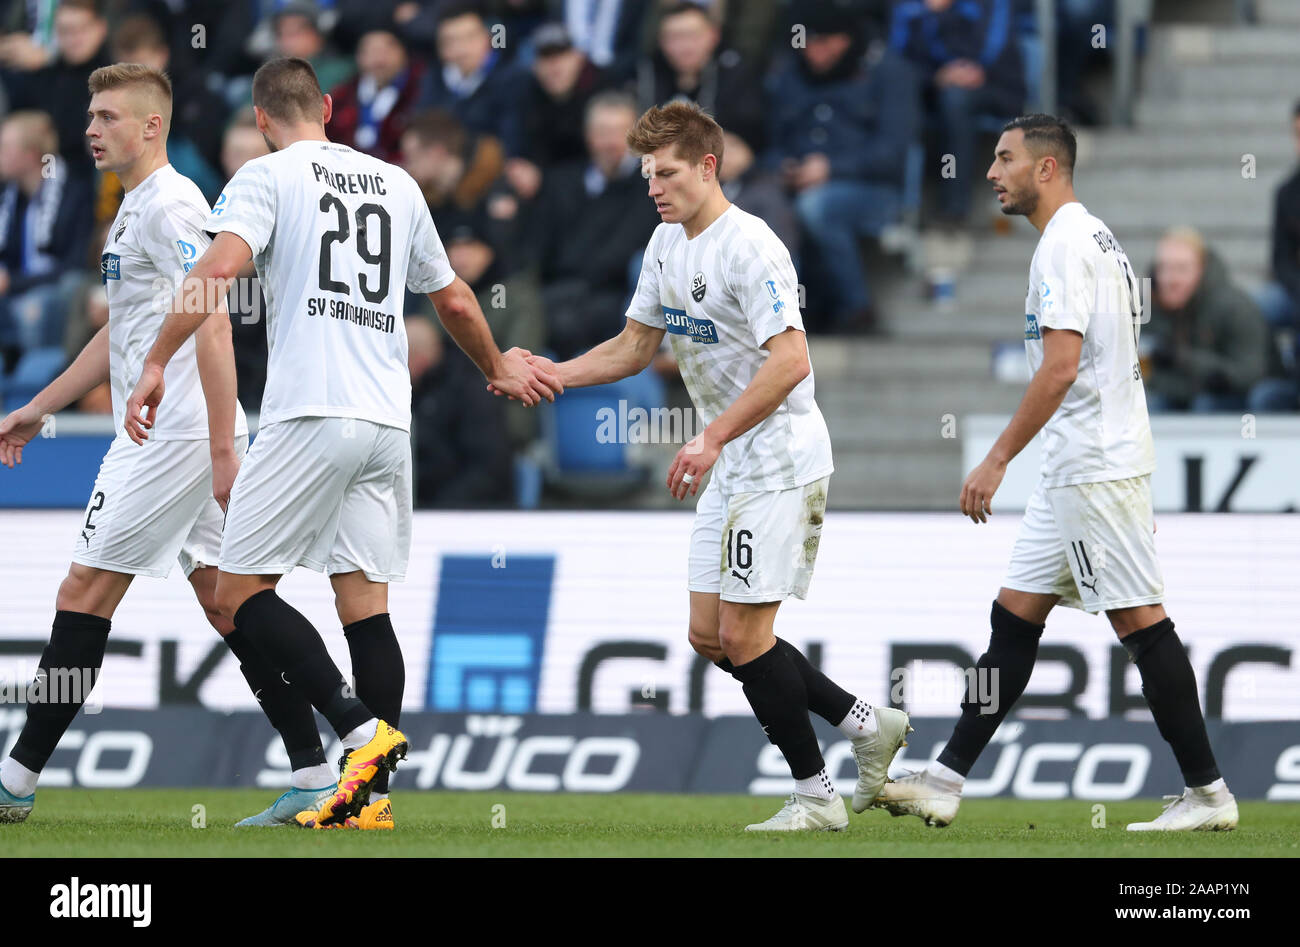 Bielefeld, Germany. 23rd Nov, 2019. Soccer: 2nd Bundesliga, Arminia Bielefeld - SV Sandhausen, 14th matchday in the Schüco Arena. Scorer Kevin Behrens (M) from Sandhausen celebrates his 1-1 goal with Ivan Paurevic (2nd from left) and Aziz Bouhaddouz (r). Credit: Friso Gentsch/dpa - IMPORTANT NOTE: In accordance with the requirements of the DFL Deutsche Fußball Liga or the DFB Deutscher Fußball-Bund, it is prohibited to use or have used photographs taken in the stadium and/or the match in the form of sequence images and/or video-like photo sequences./dpa/Alamy Live News Stock Photo